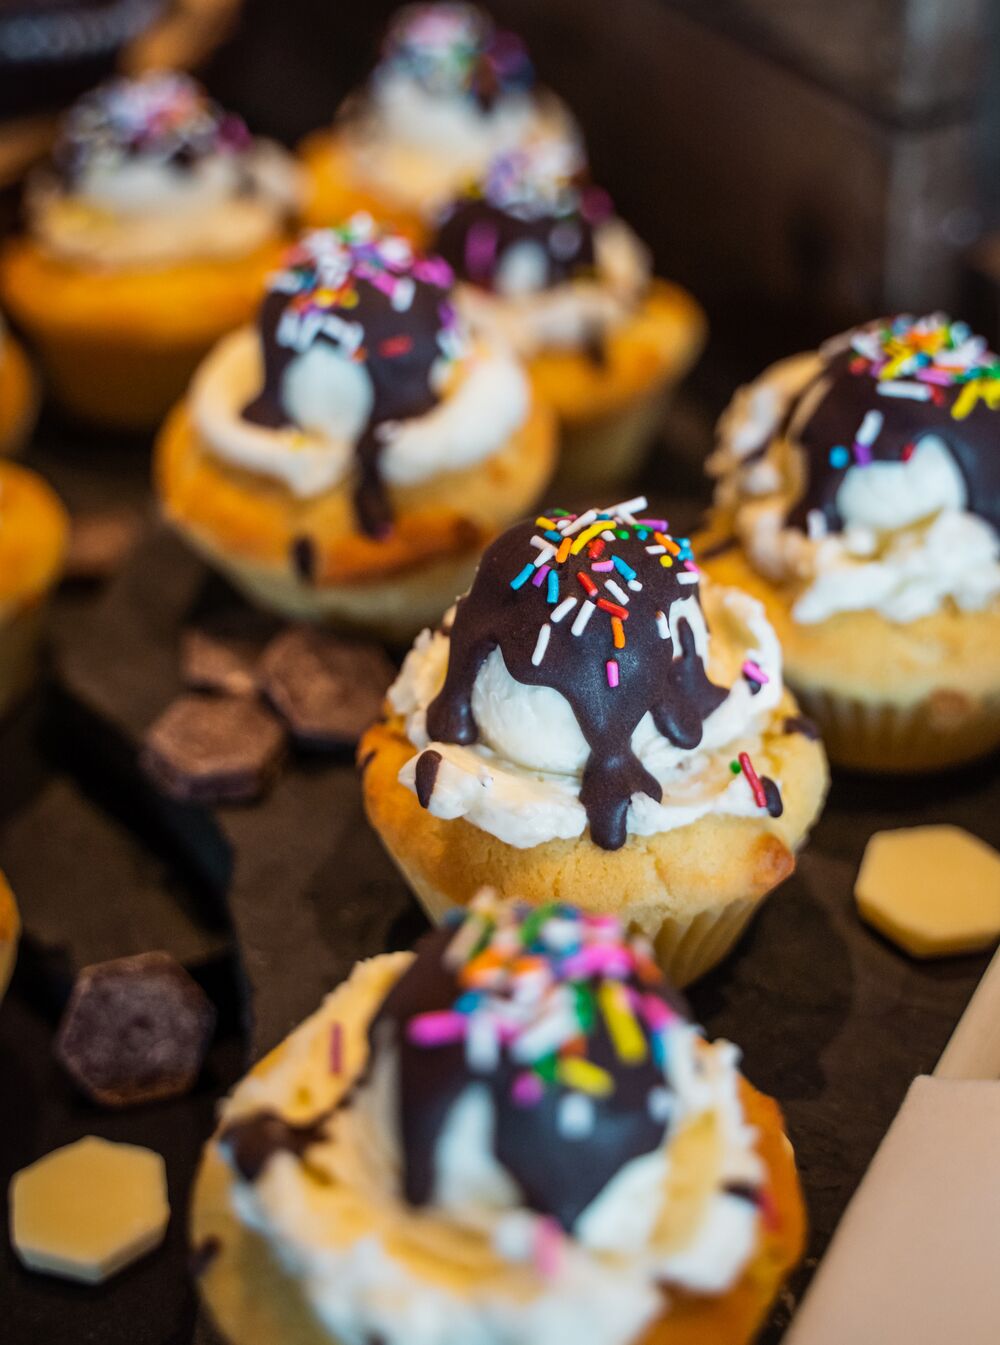 Mini cupcake deserts with chocolate and sprinkles on top at the Banff Gondola in Banff National Park.